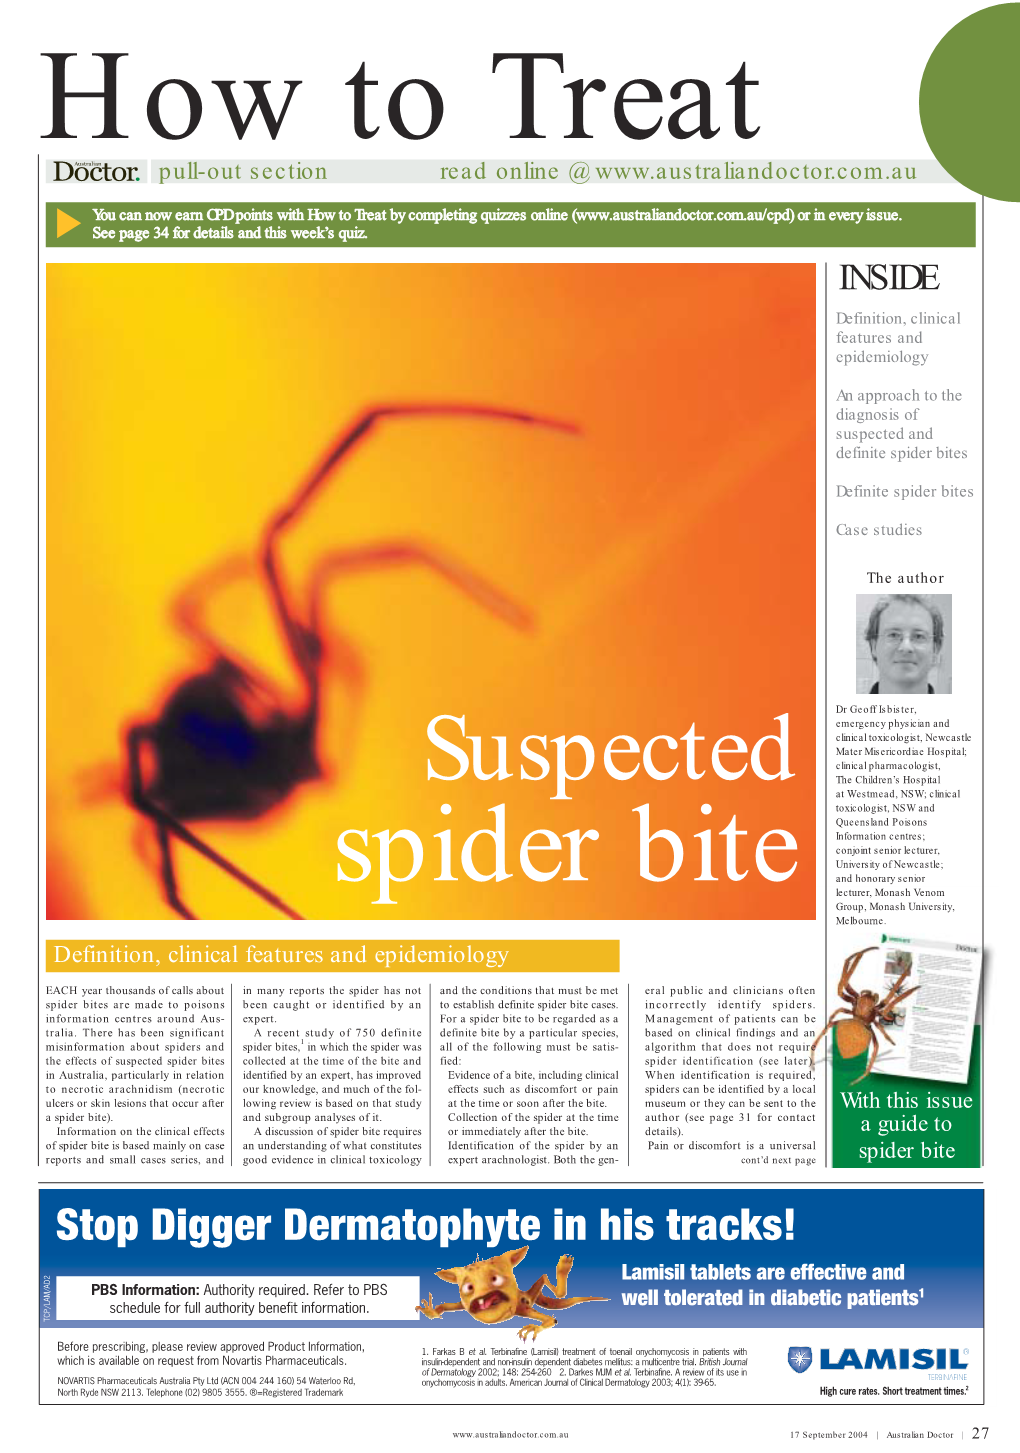 How to Treat a Suspected Spider Bite.Pdf